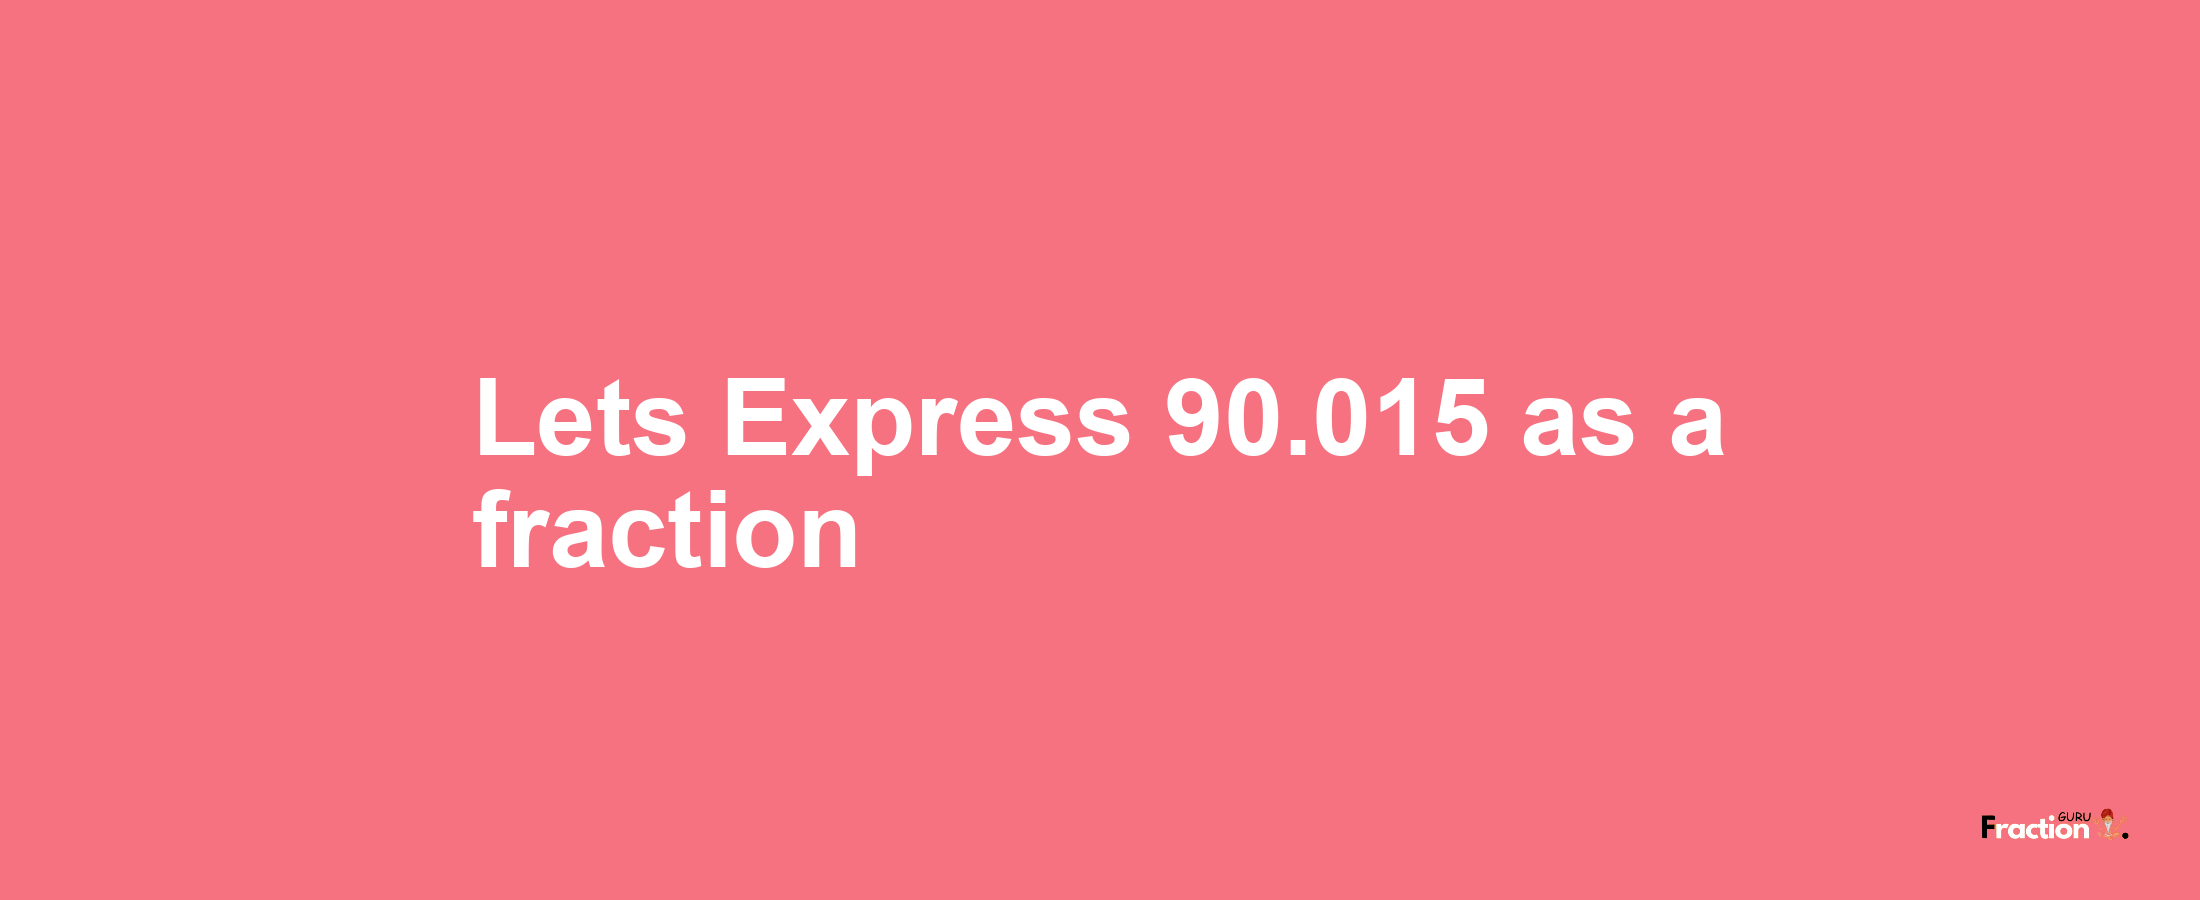 Lets Express 90.015 as afraction